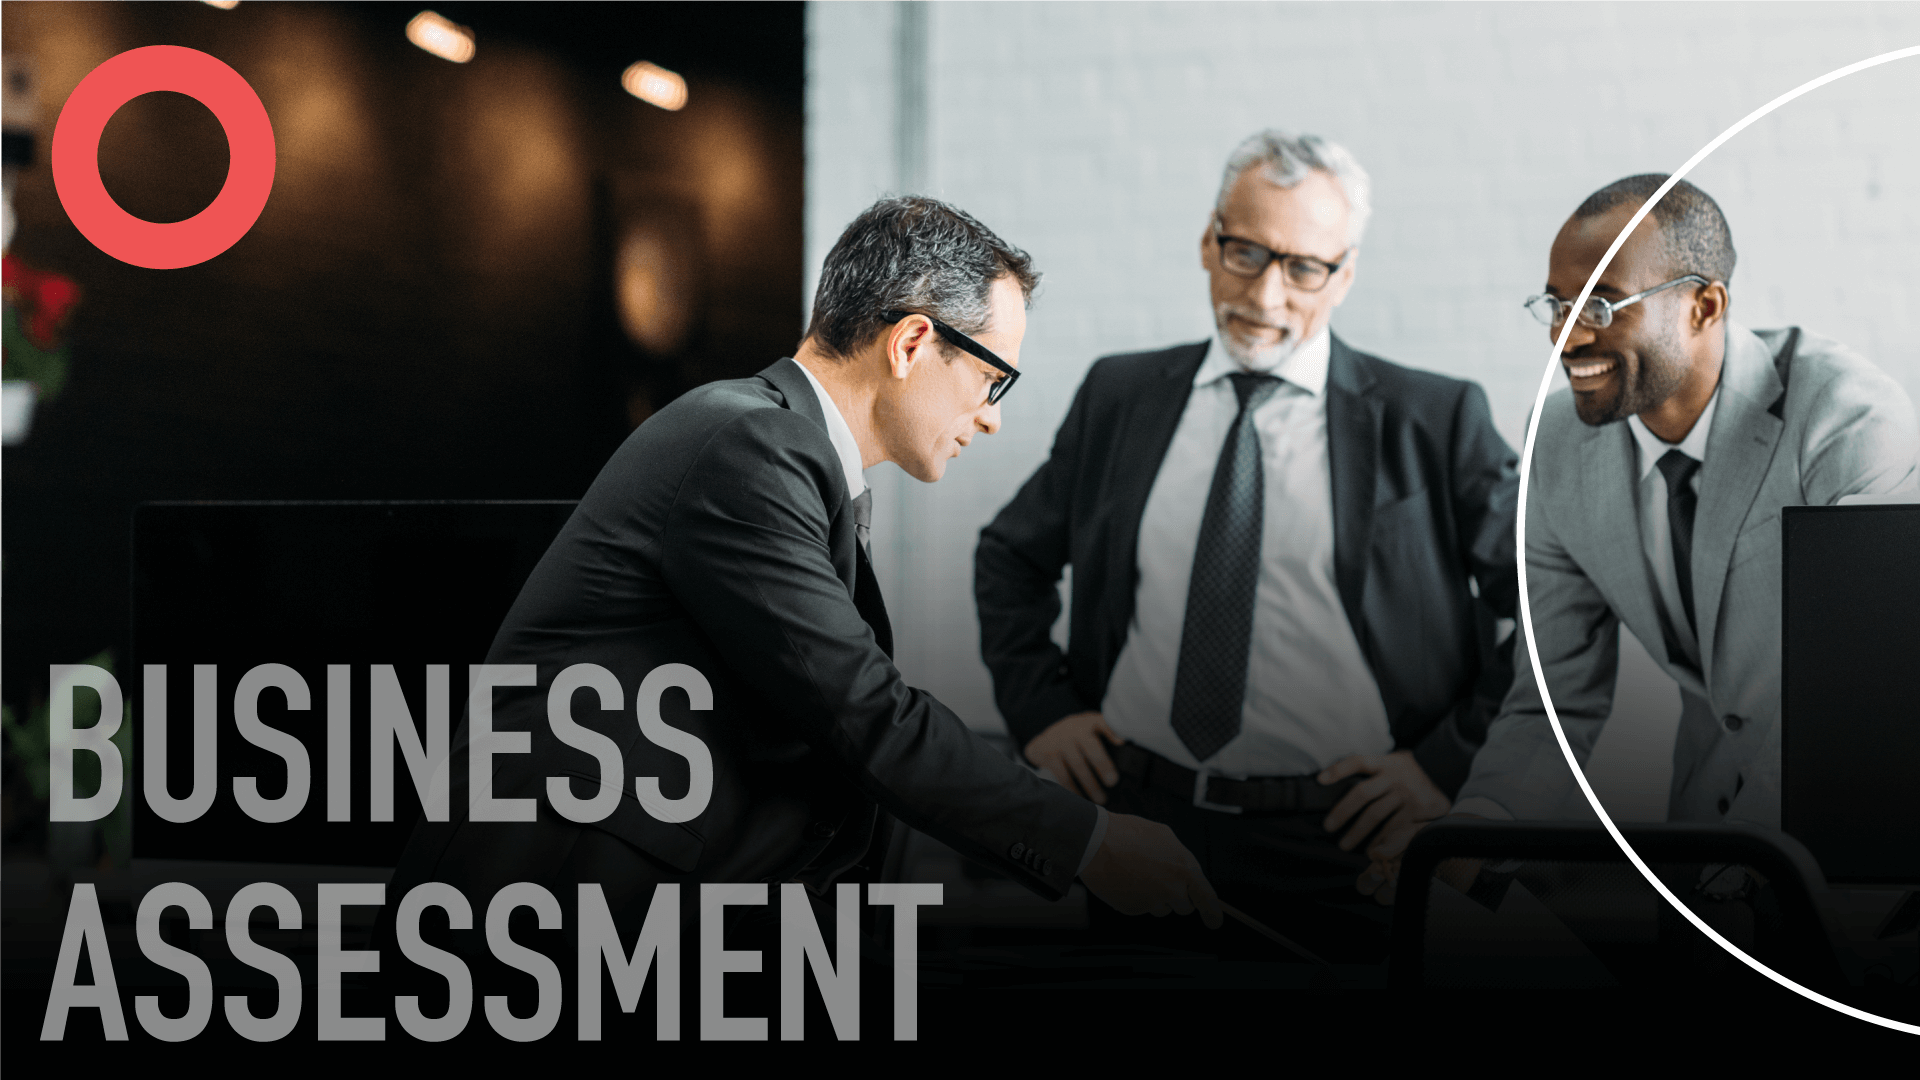 Our Business Assessments provide the answers you need to drive success